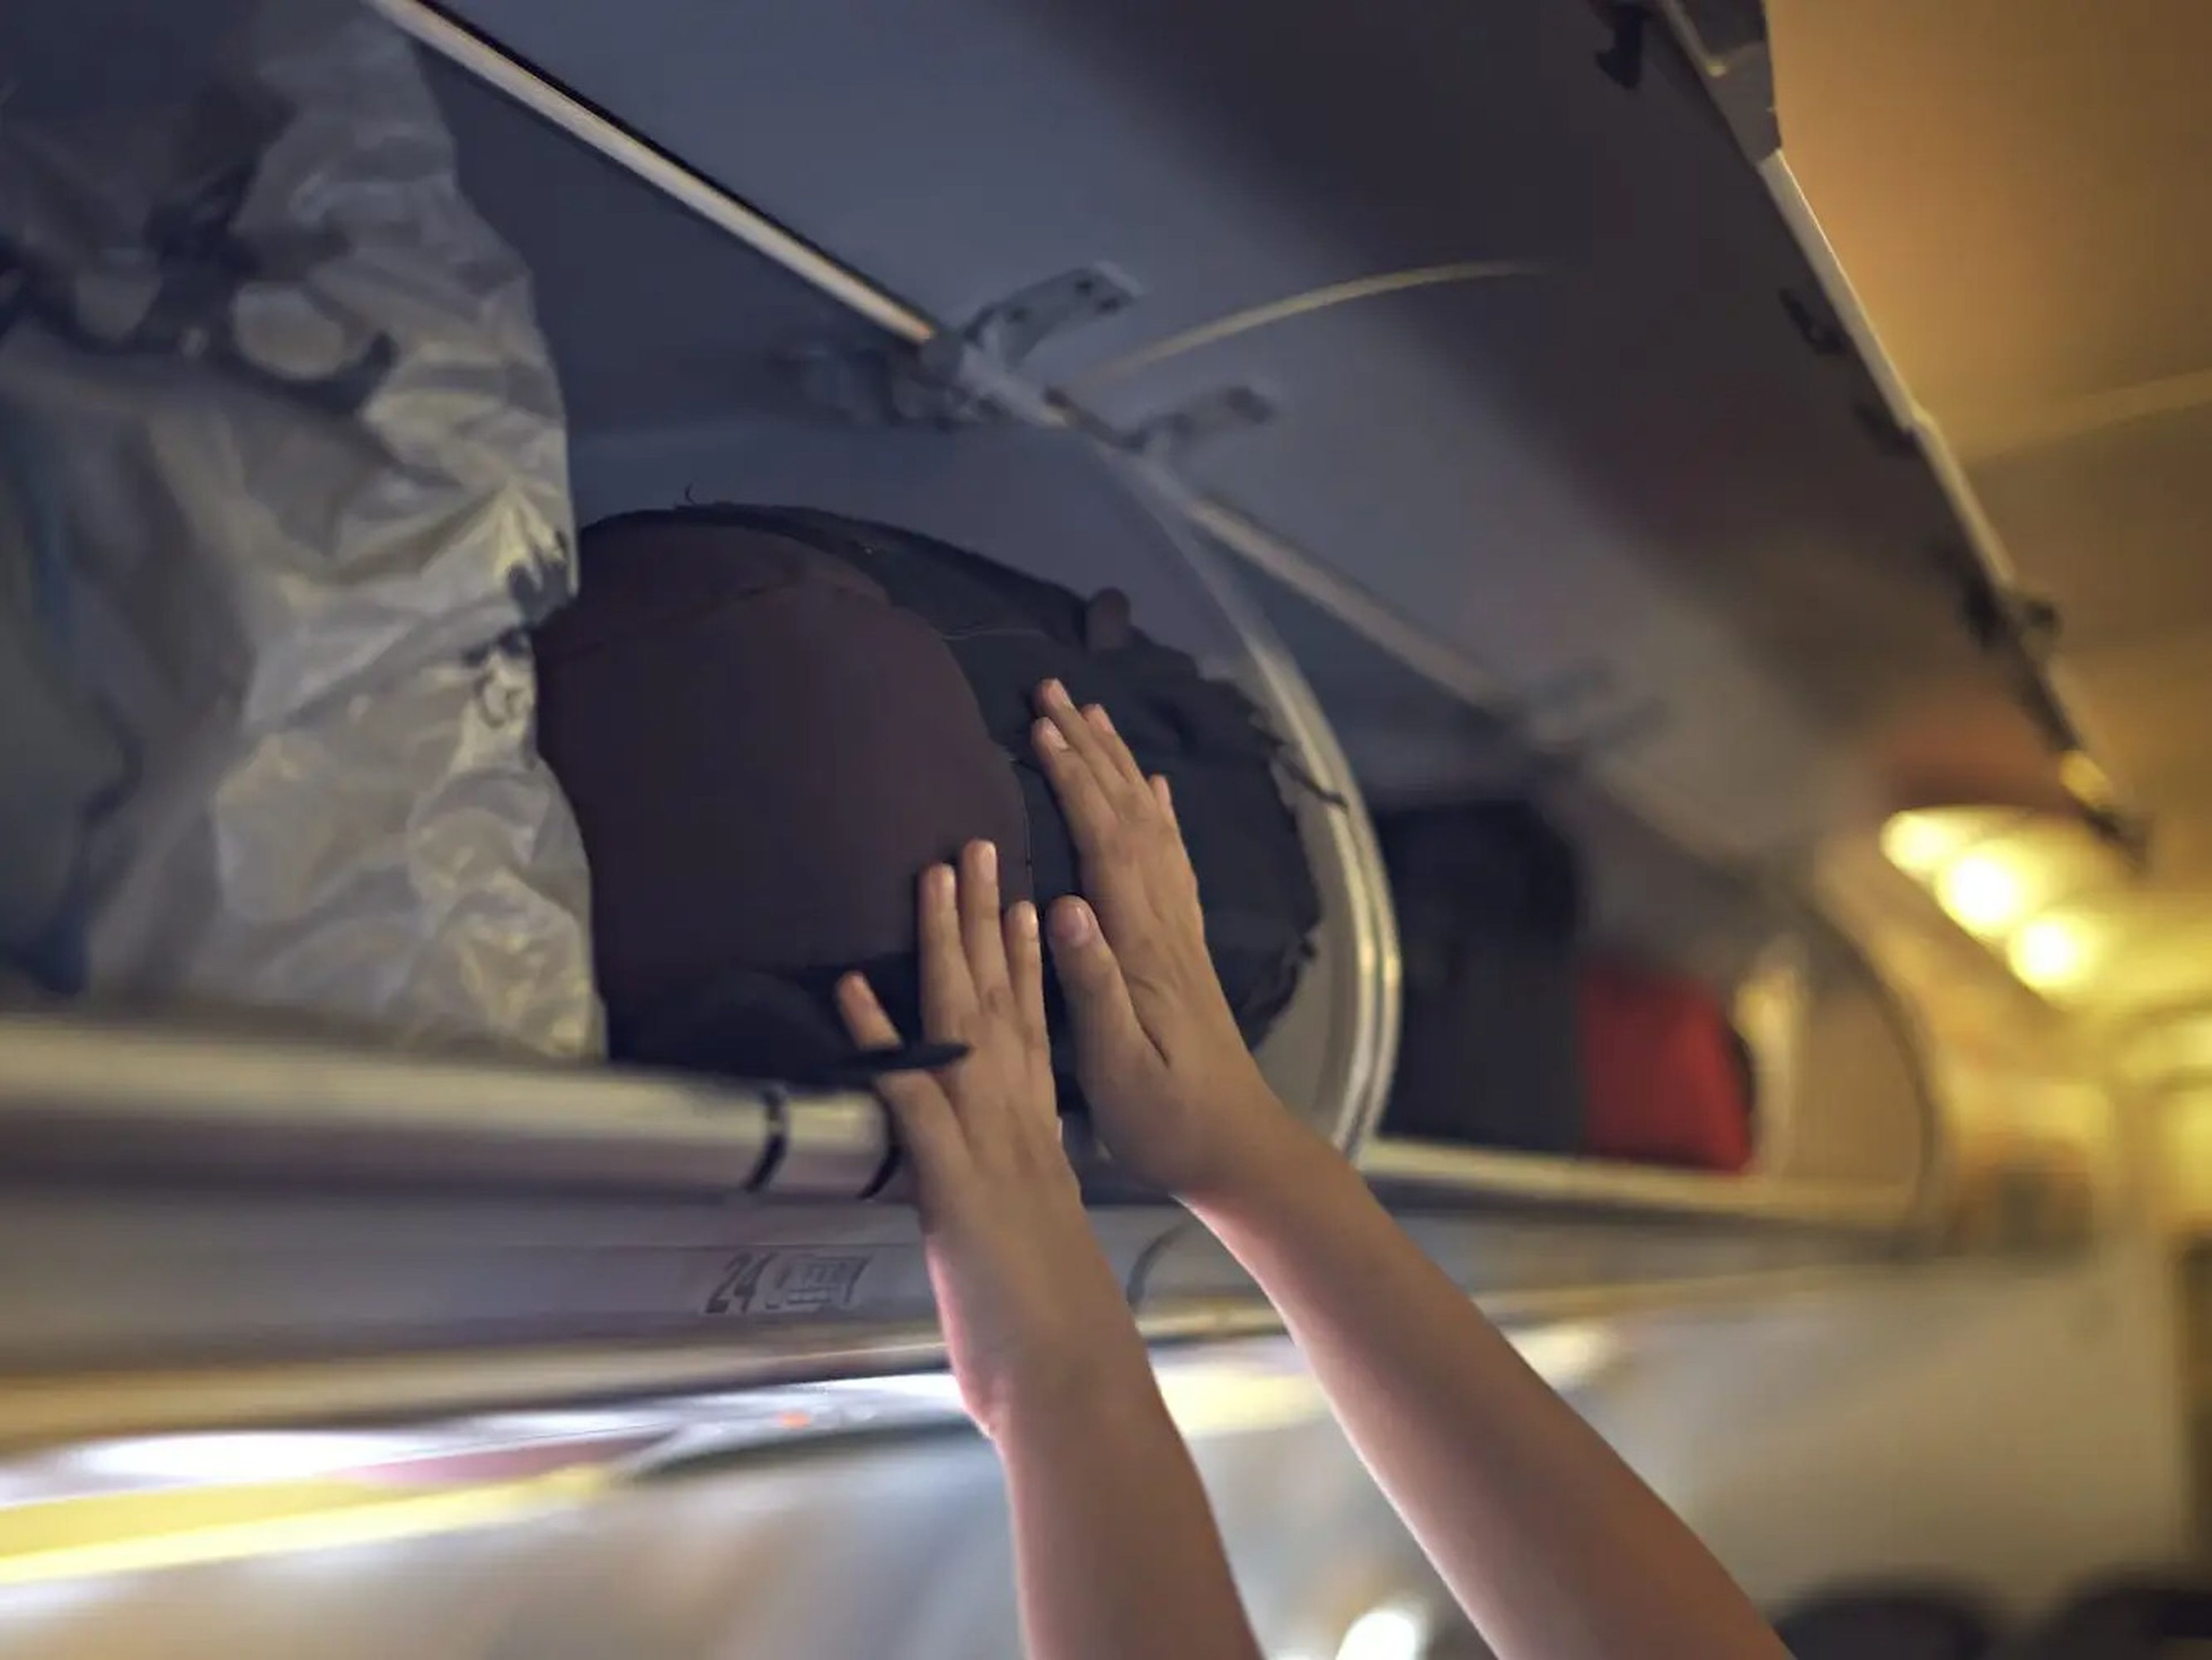 A person lifts their luggage into an overhead bin.